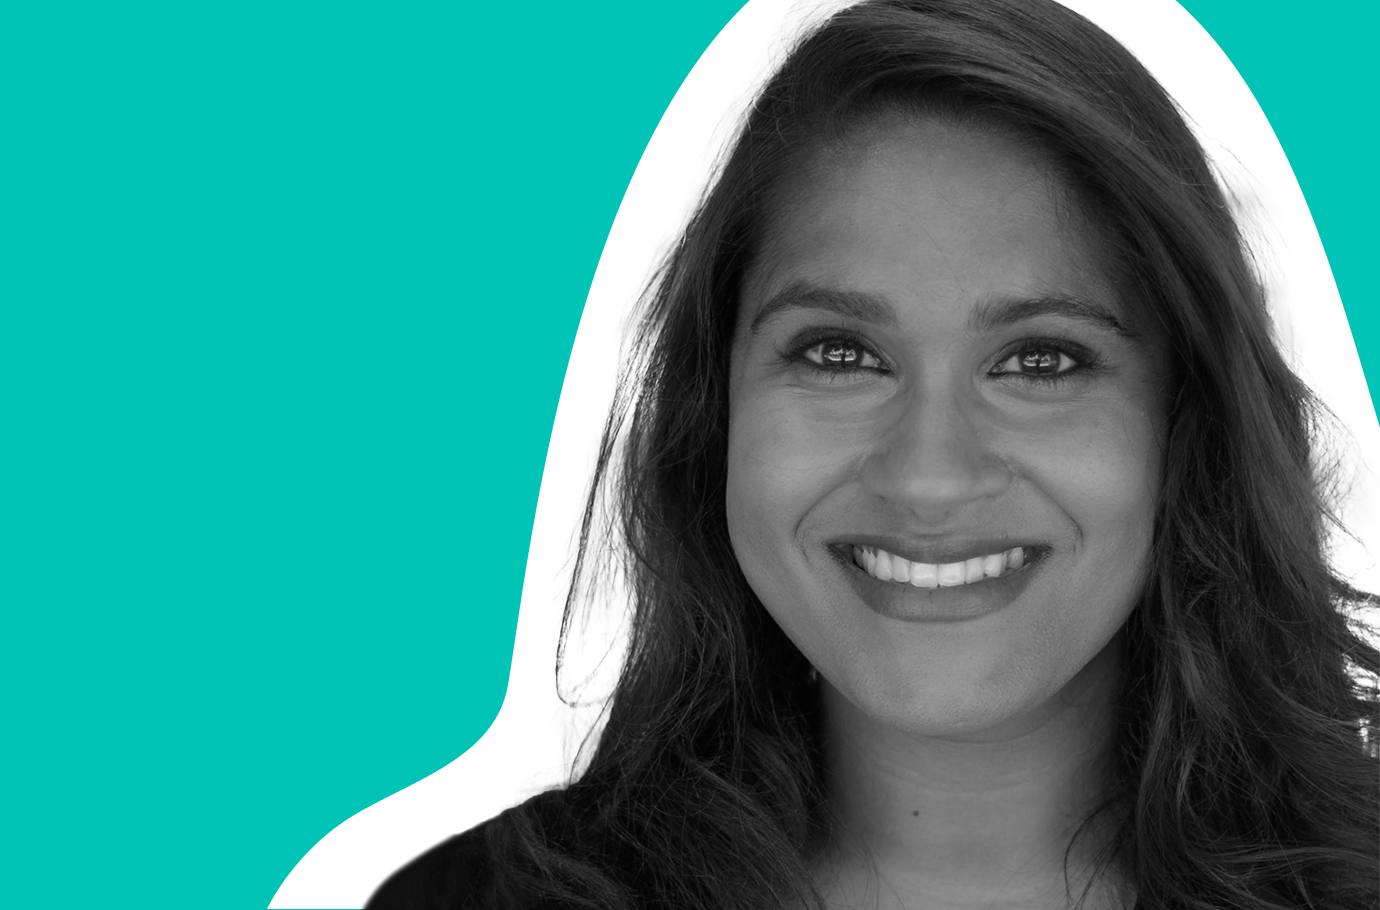 Rupal Mehta in black and white against a teal background.